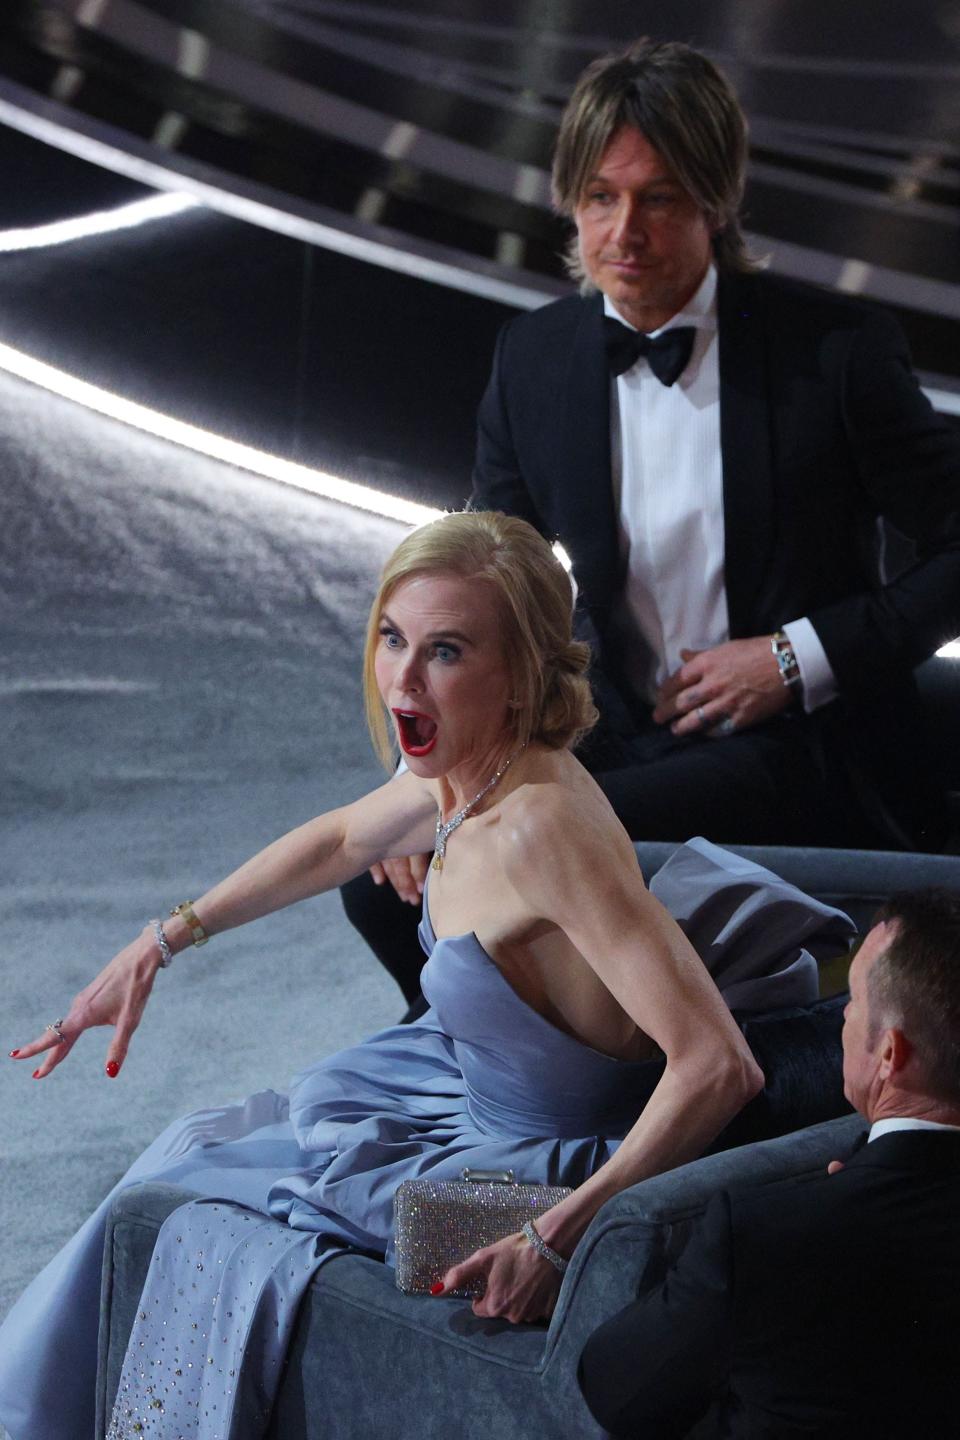 a photo of nicole kidman expressively reacting to something, twisted slightly in a chair with her eyes wide and eyebrows raised and mouth open. she's at the oscars wearing a blue gown, and her husband keith urban is behind her